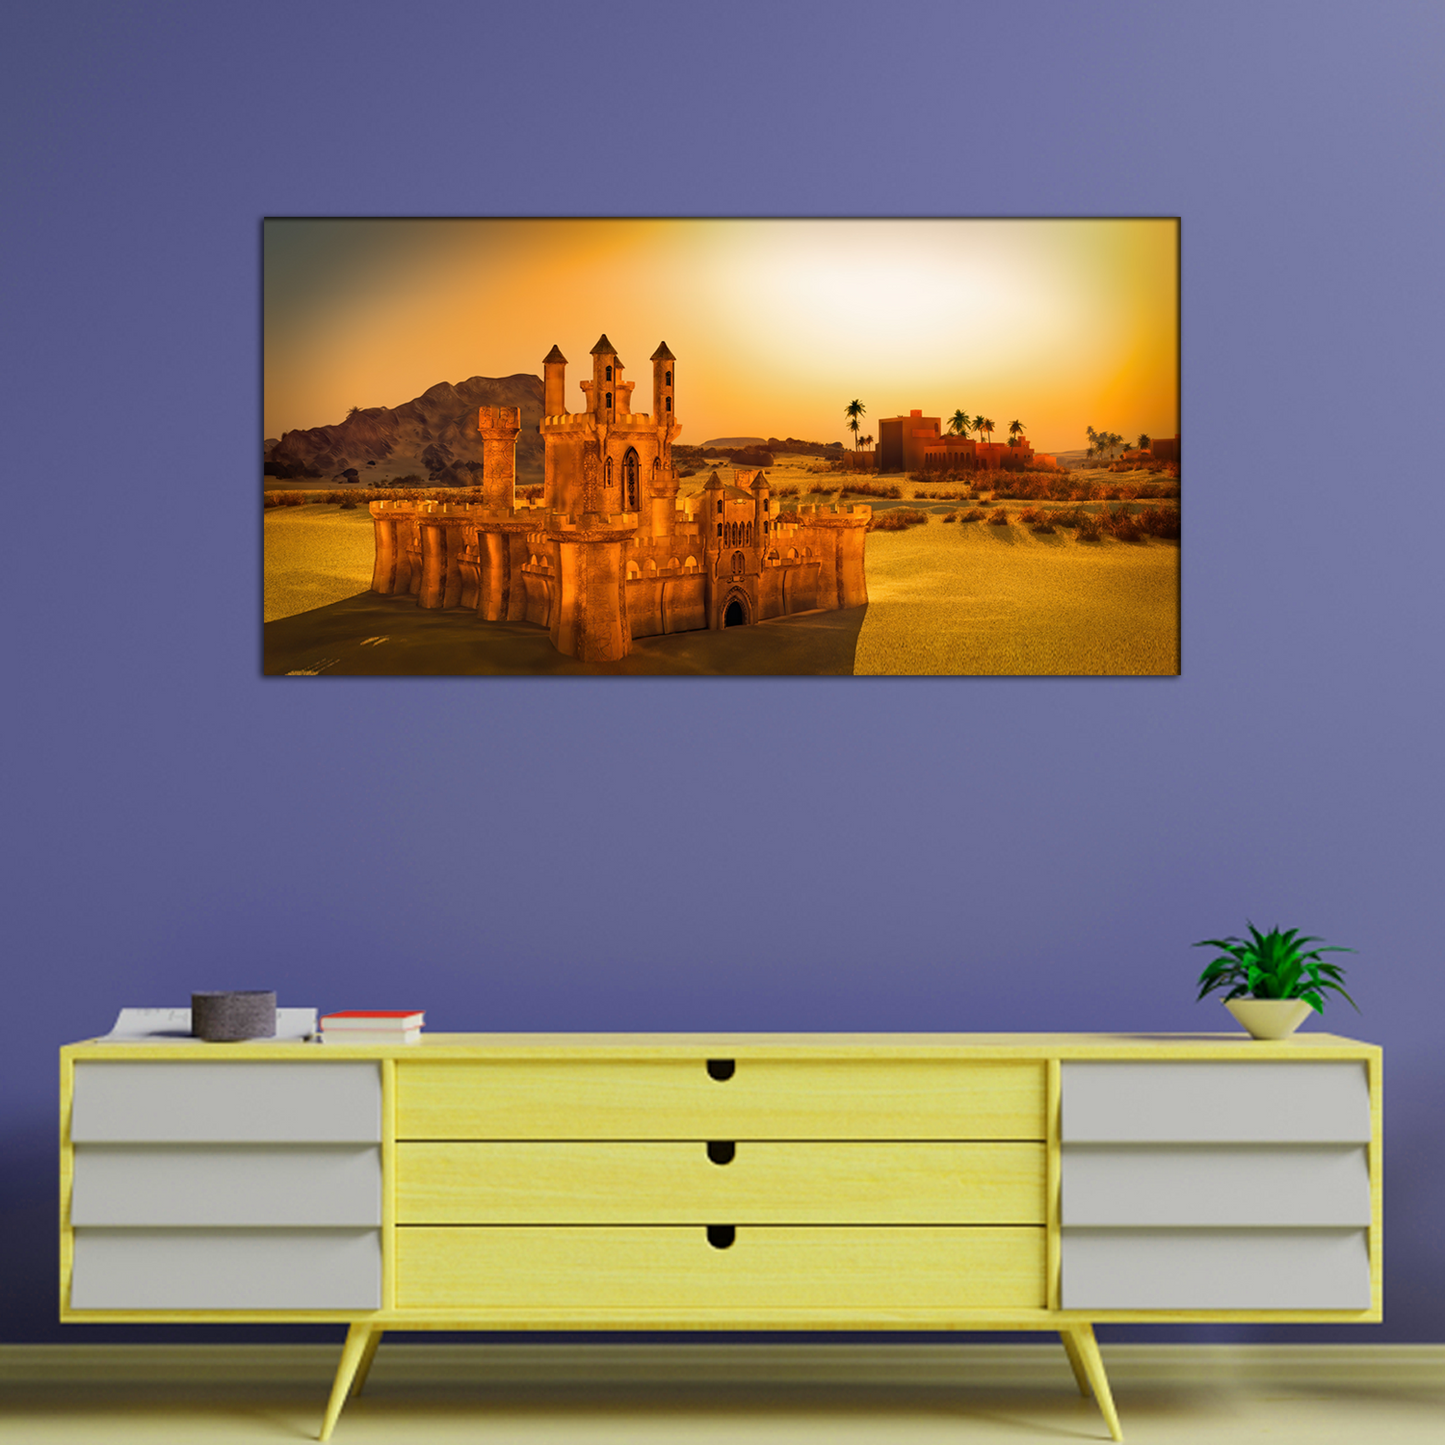 Arabic Small Town on Desert Monument Canvas Wall Painting